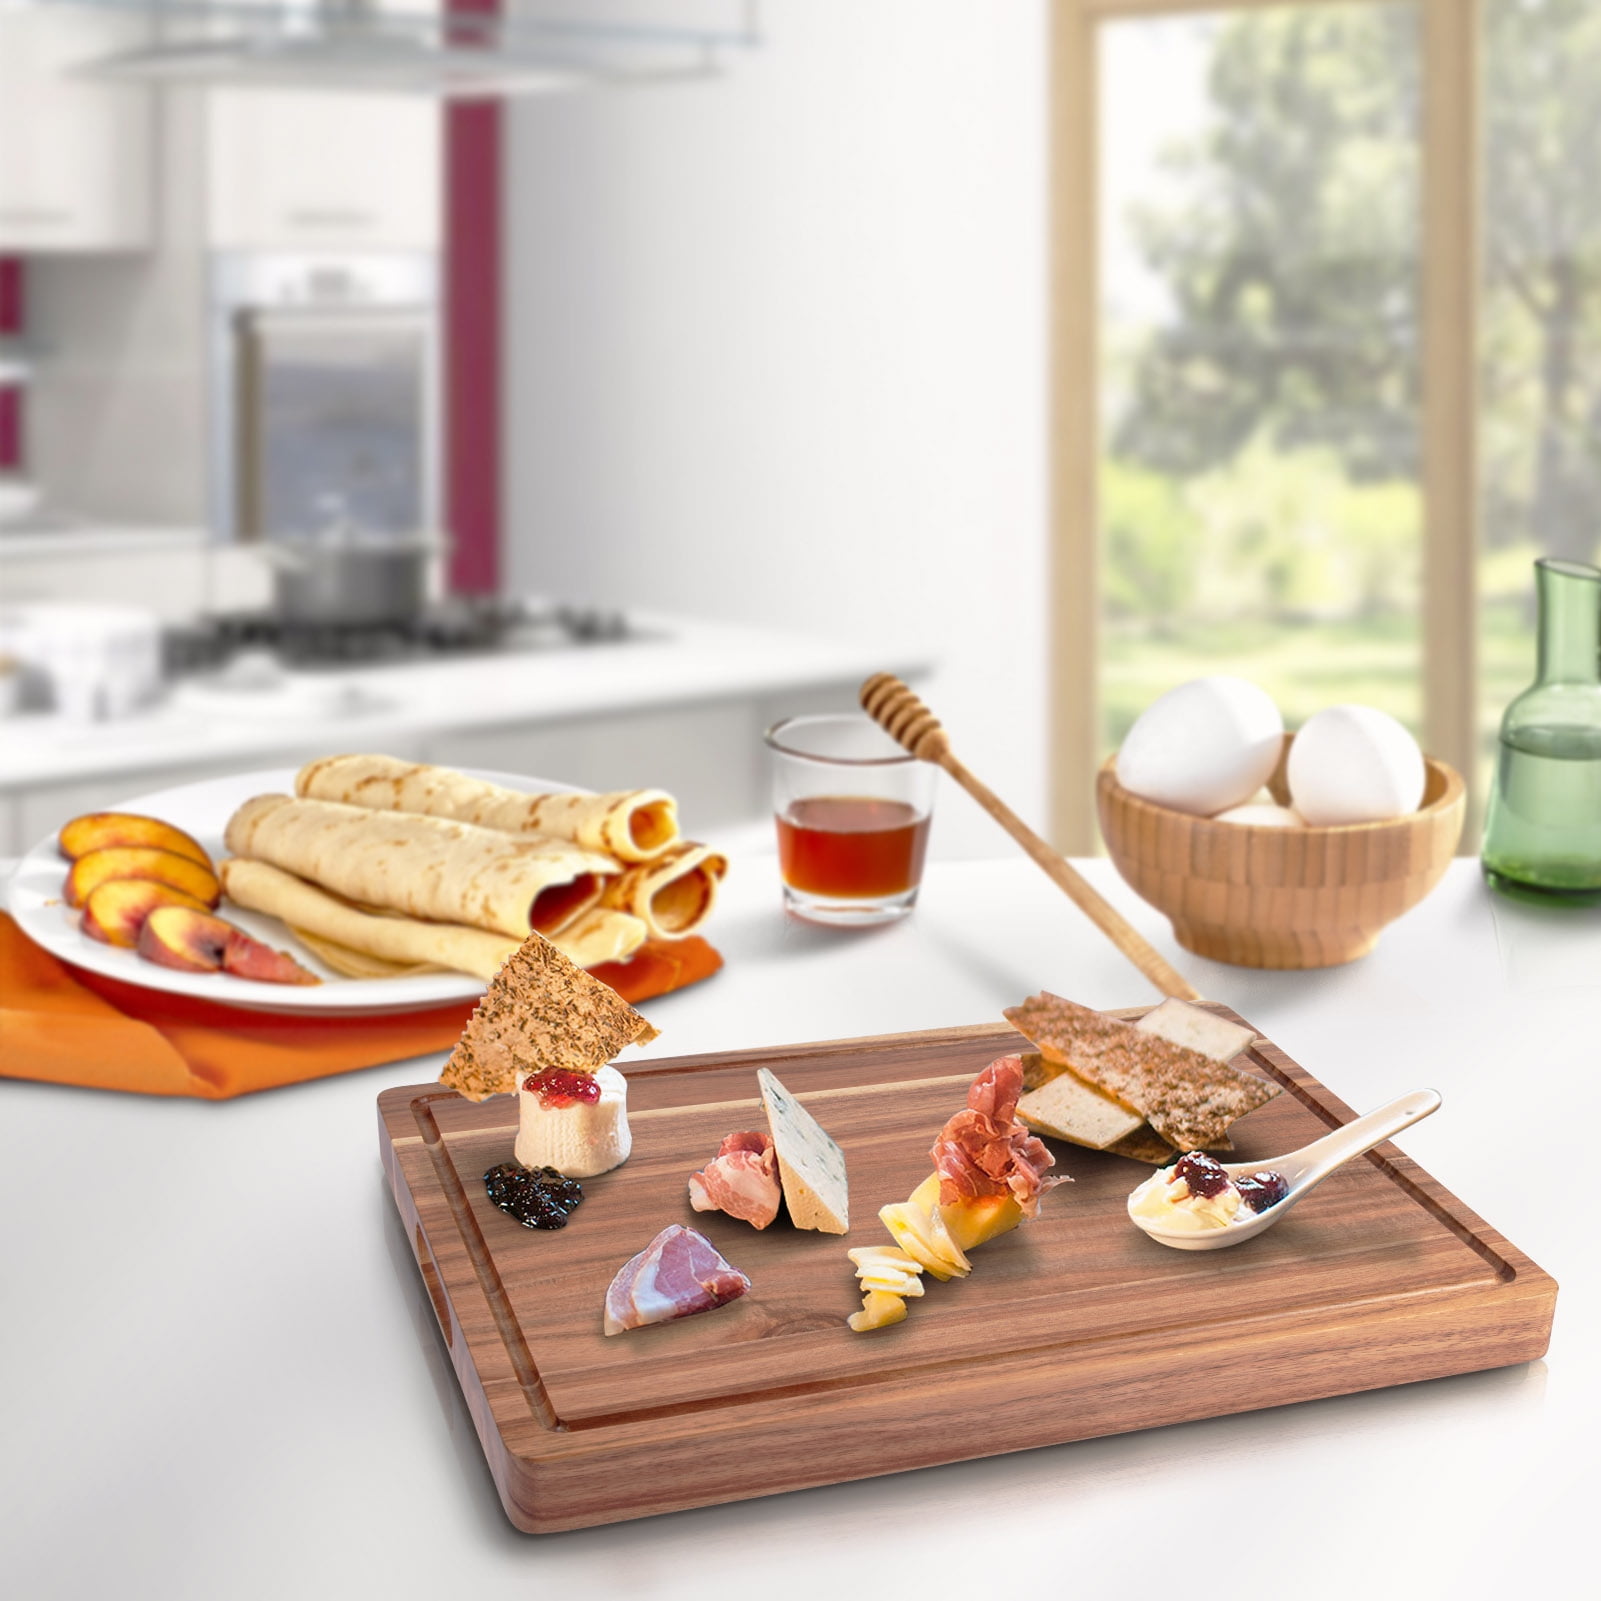 Cibeat Wood Cutting Board 24x18in Kitchen Extra Large Heavy Duty Butcher  Block with Juice Groove and Built-in Handles 